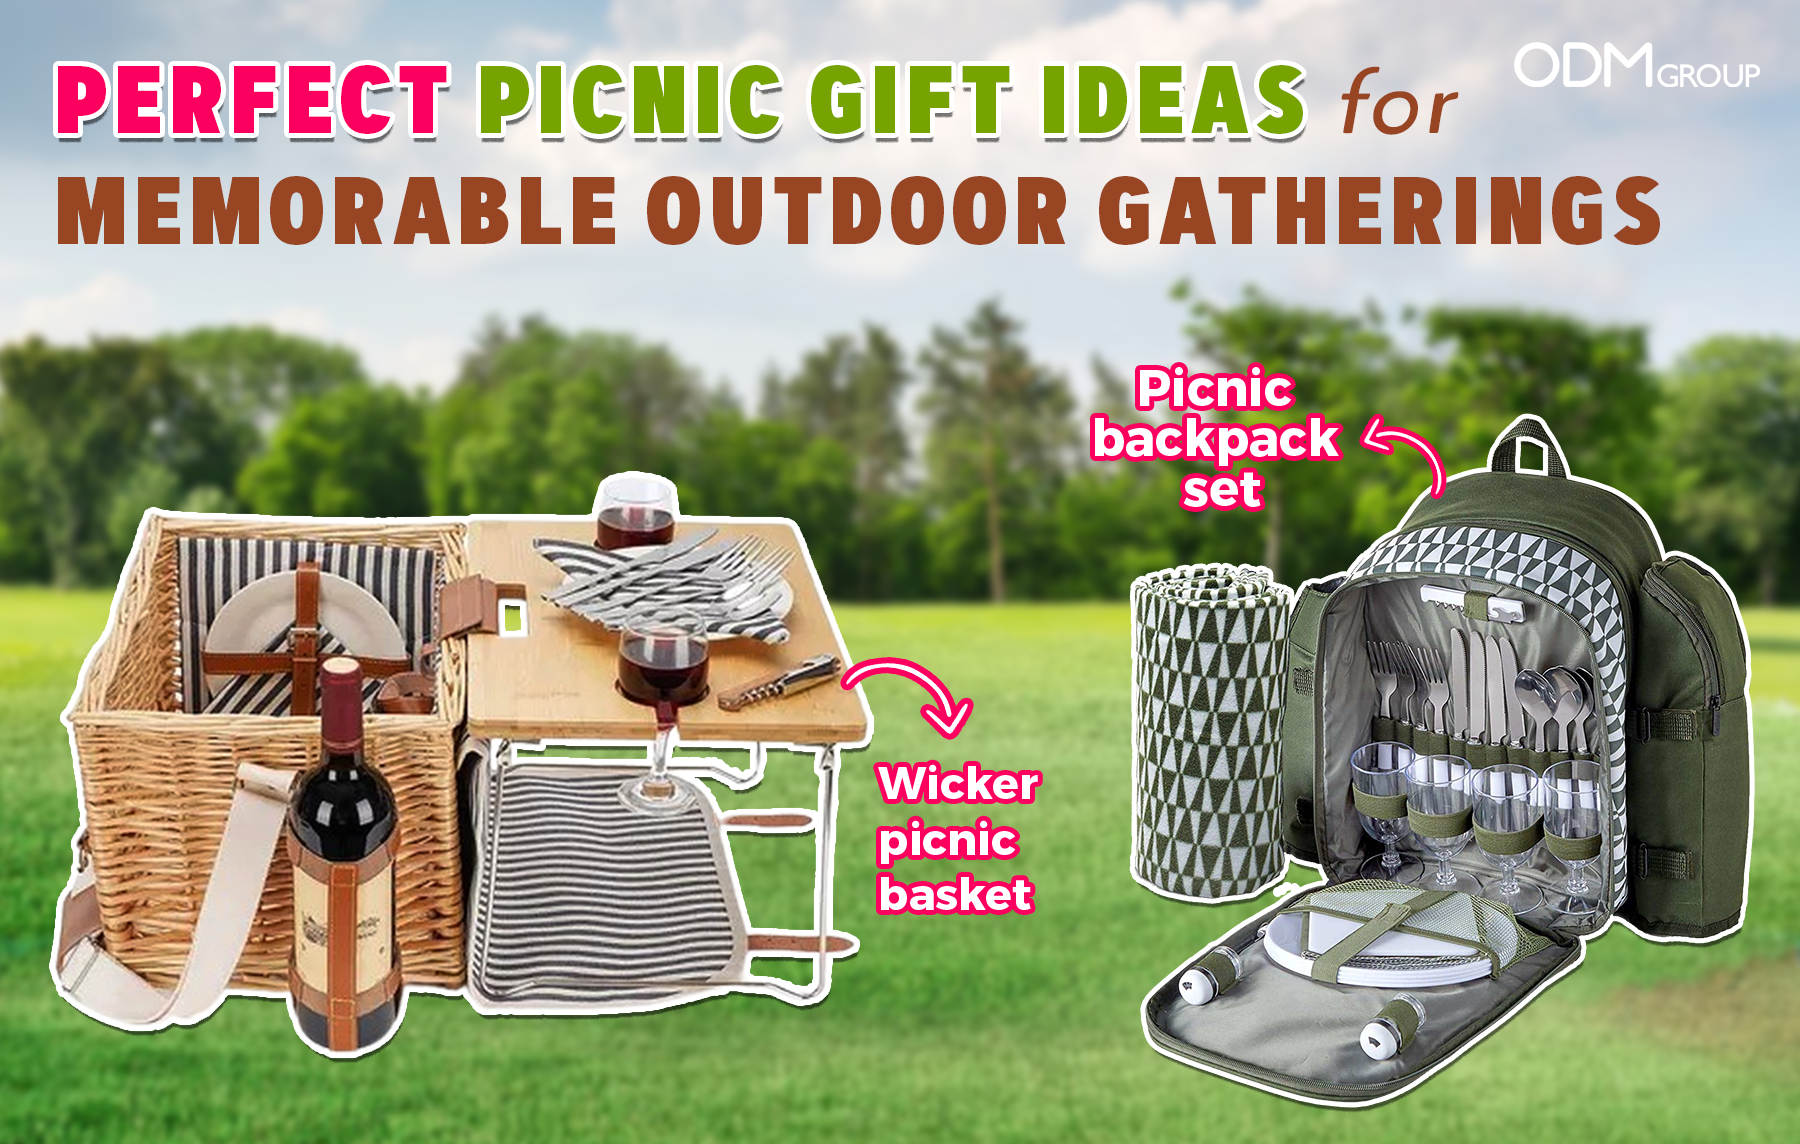 Perfect Picnic Gift Ideas for Memorable Outdoor Gatherings_featured image